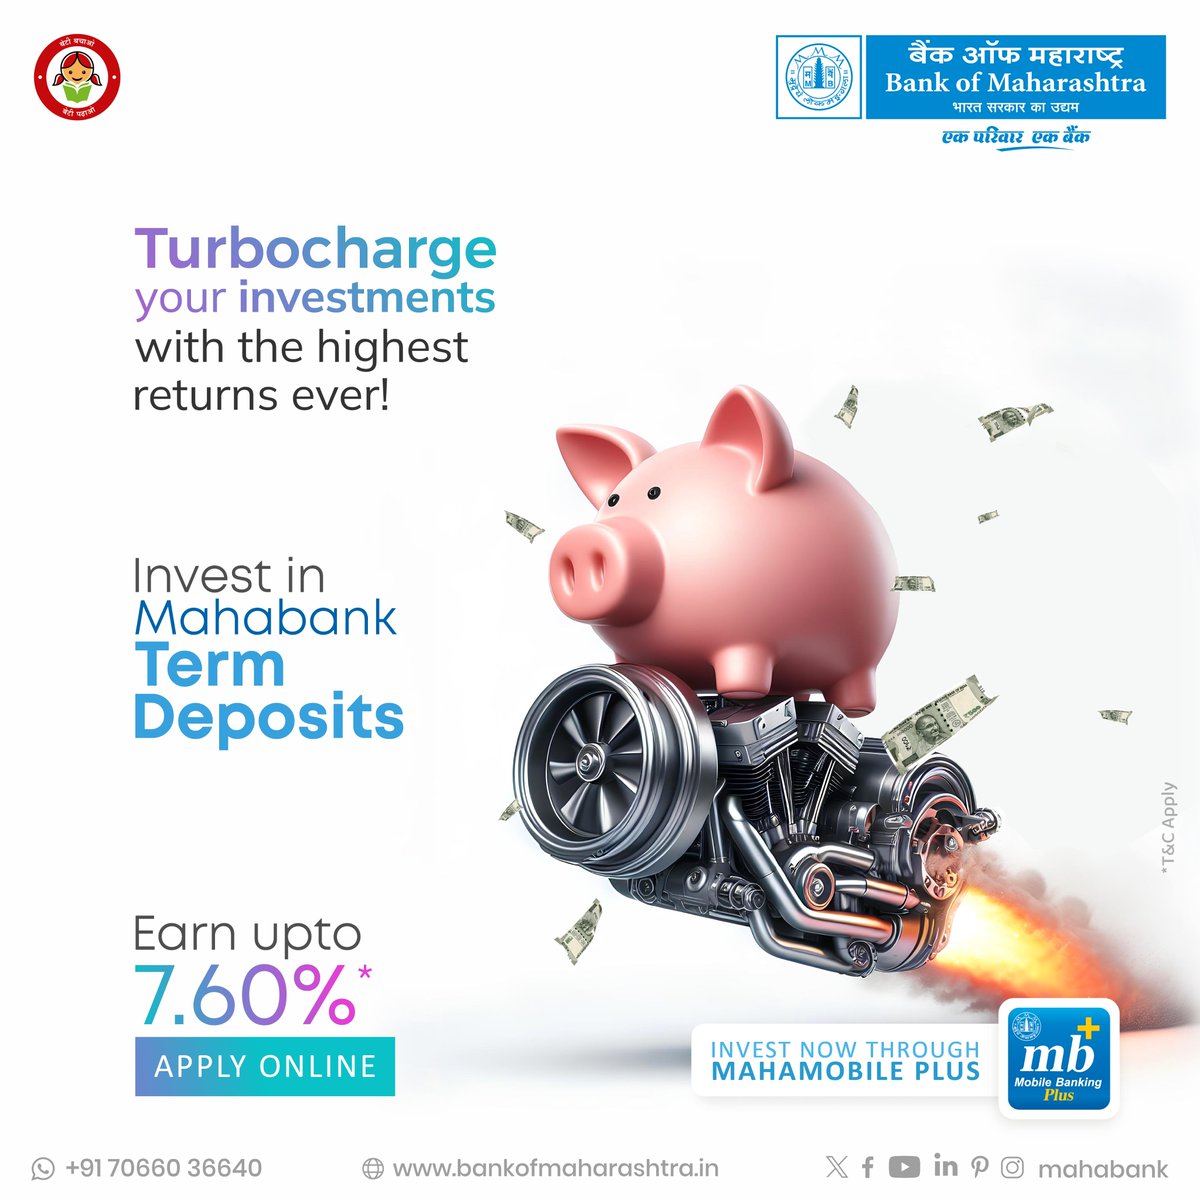 Turbocharge your savings strategy! Invest smart in Mahabank Term Deposits and watch your money grow with impressive interest returns of upto 7.60%. Now, open your Fixed Deposits in clicks through Mahamobile Plus!

Click to know more bit.ly/3IXypww

#BankofMaharashtra